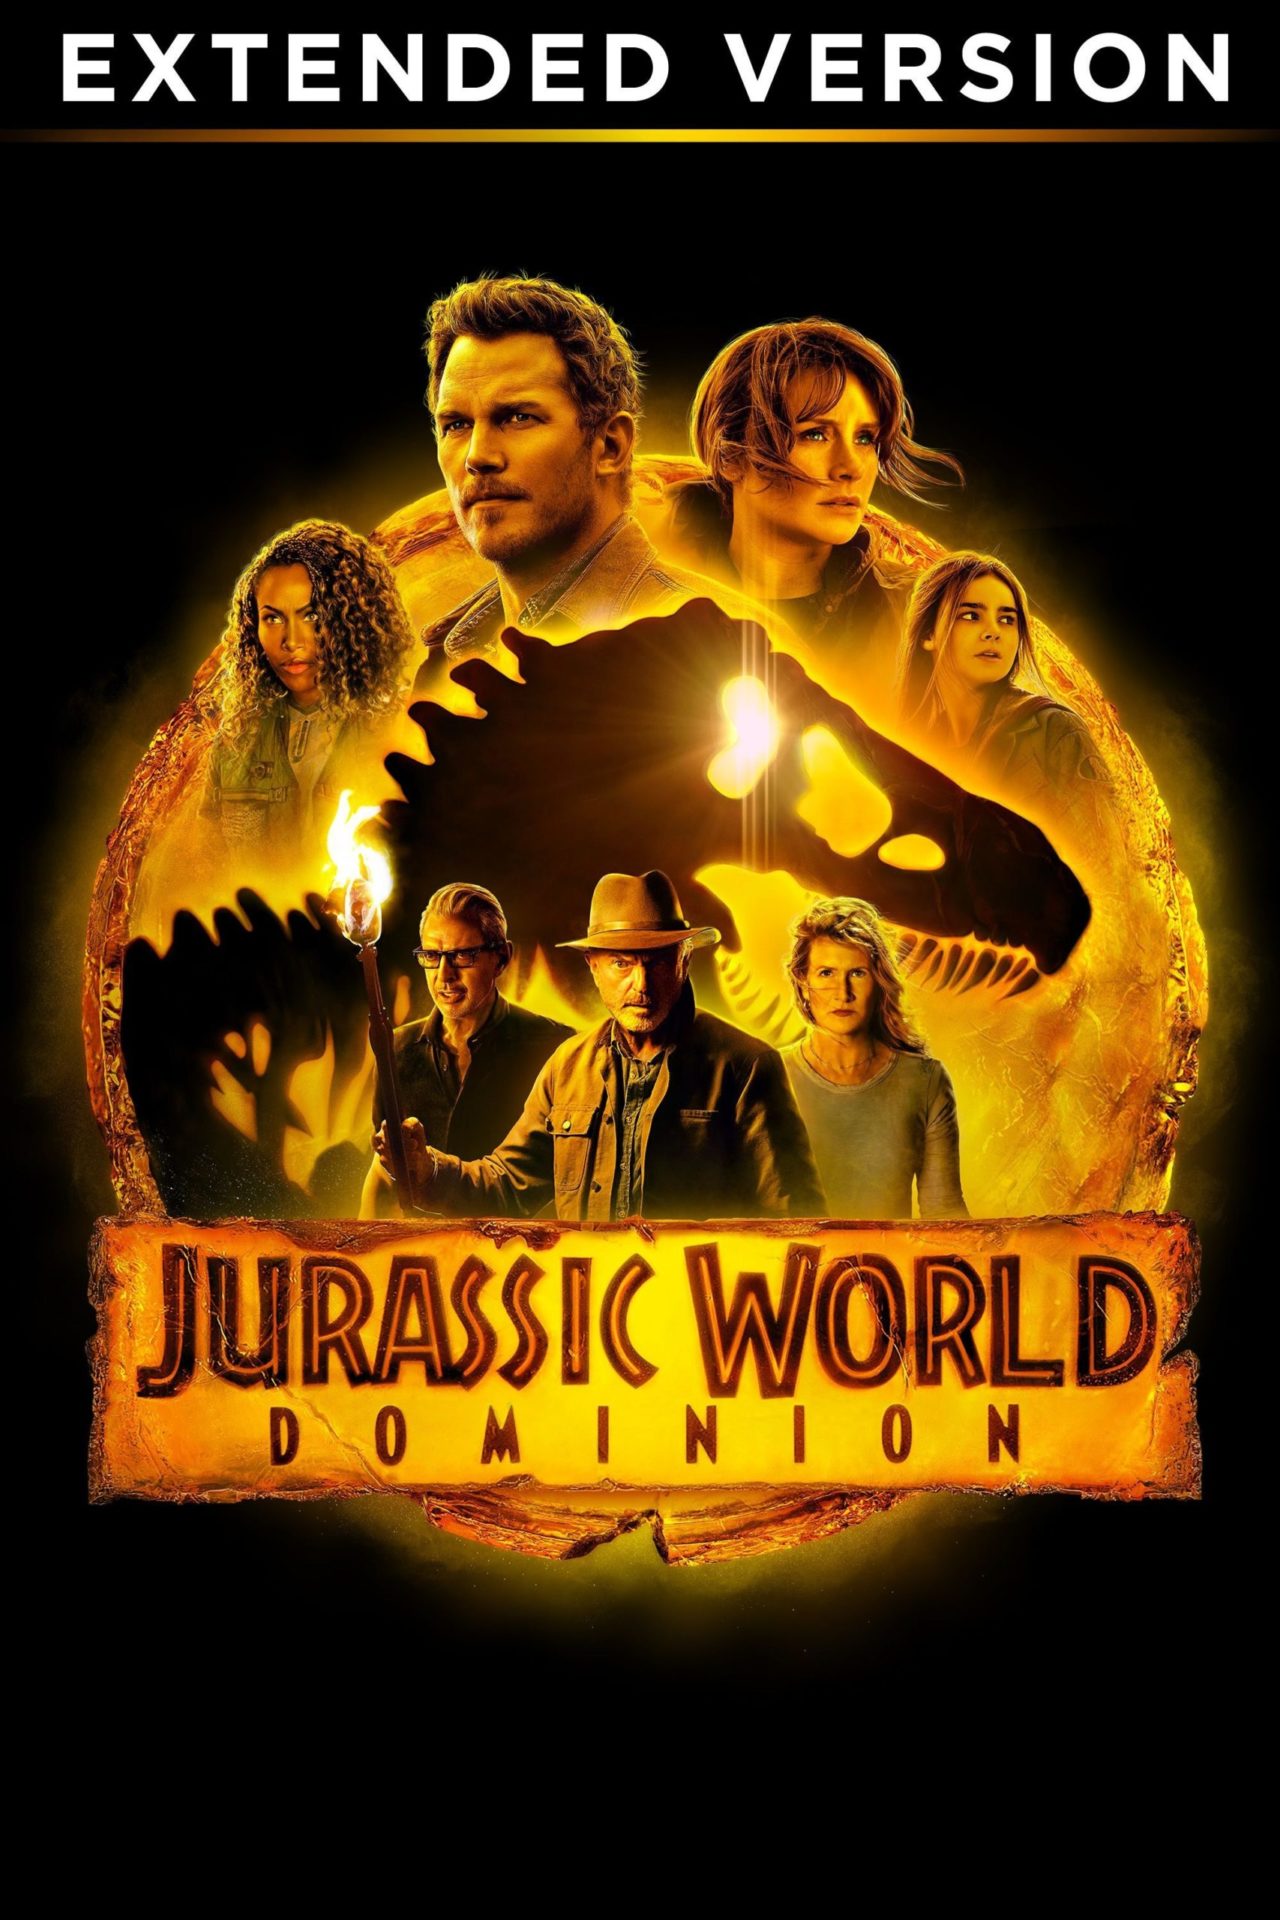 Jurassic World Dominion Theatrical And Extended Version To Debut On Peacock September 2 Nor 5650